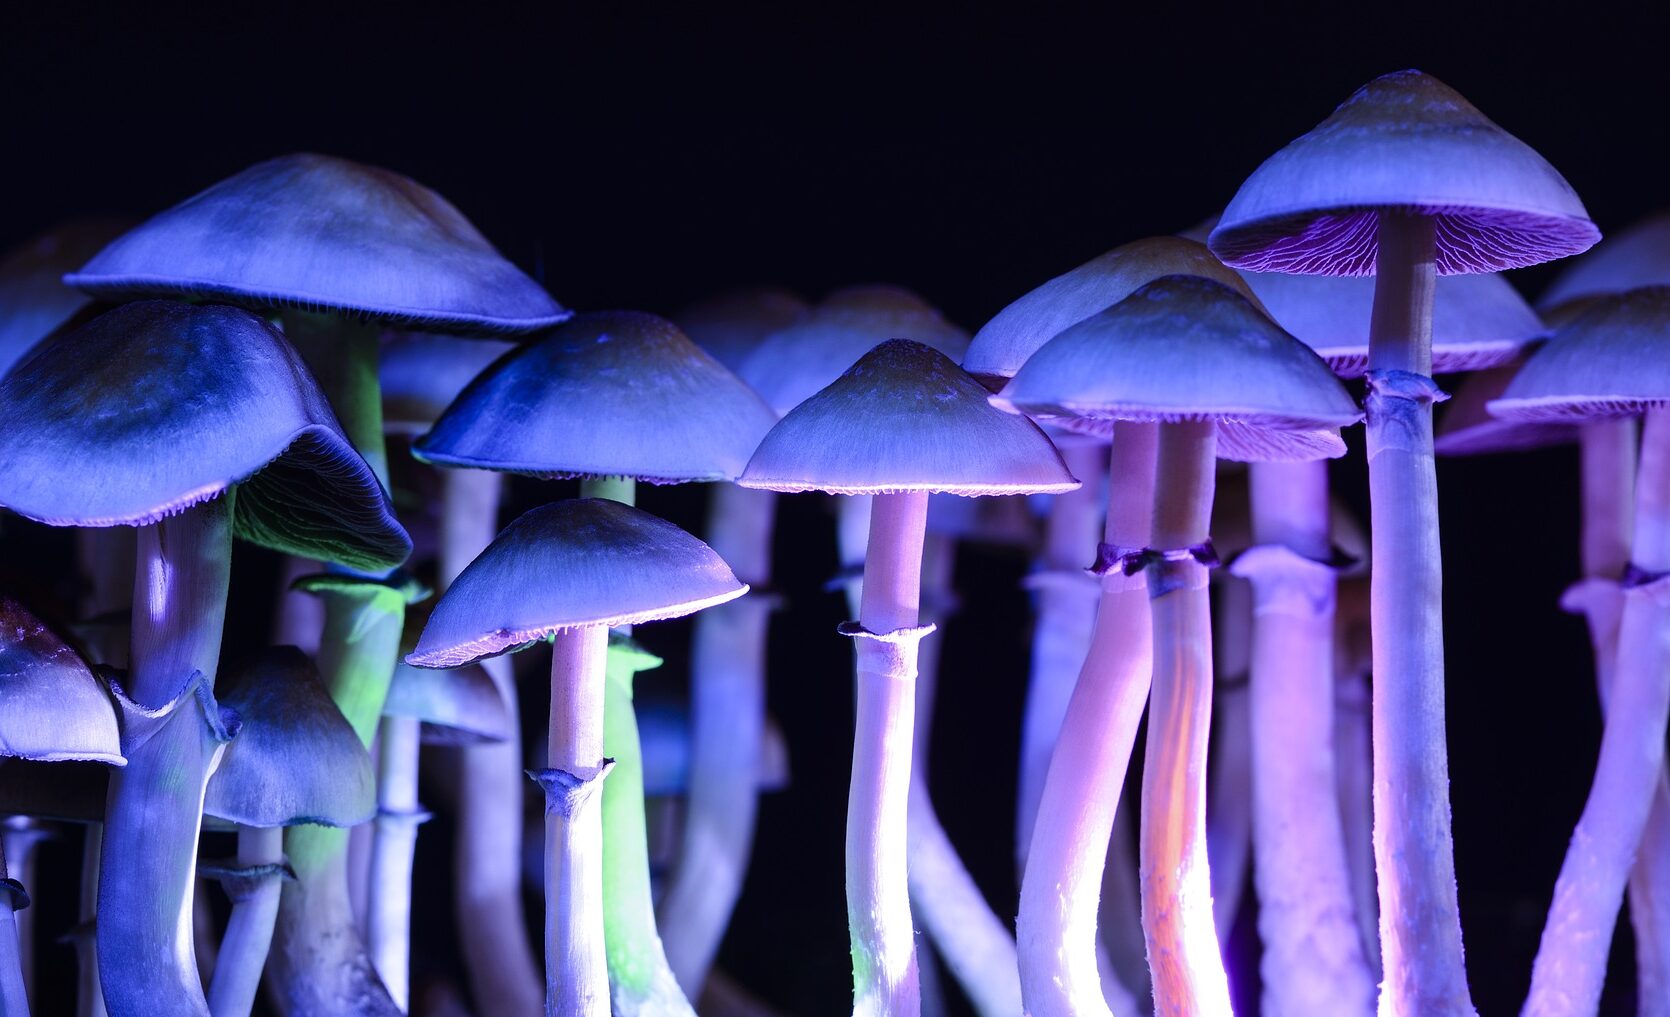 Psilocybin mushrooms can be used to treat PTSD and depression.